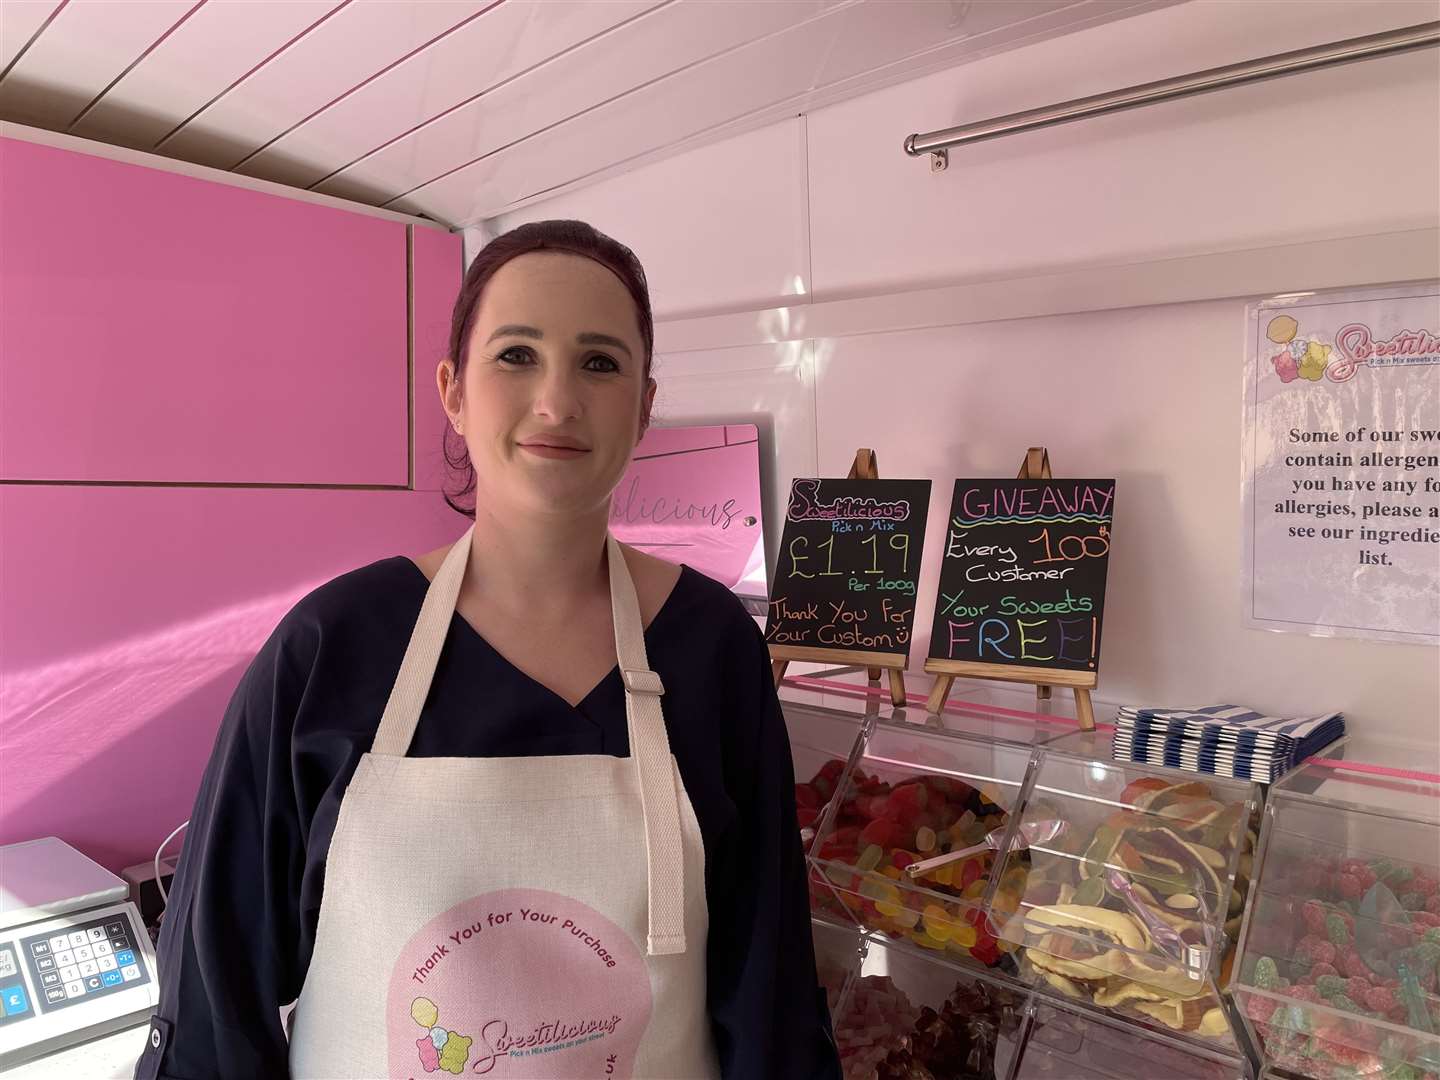 Lauren Mills opened the business earlier this month